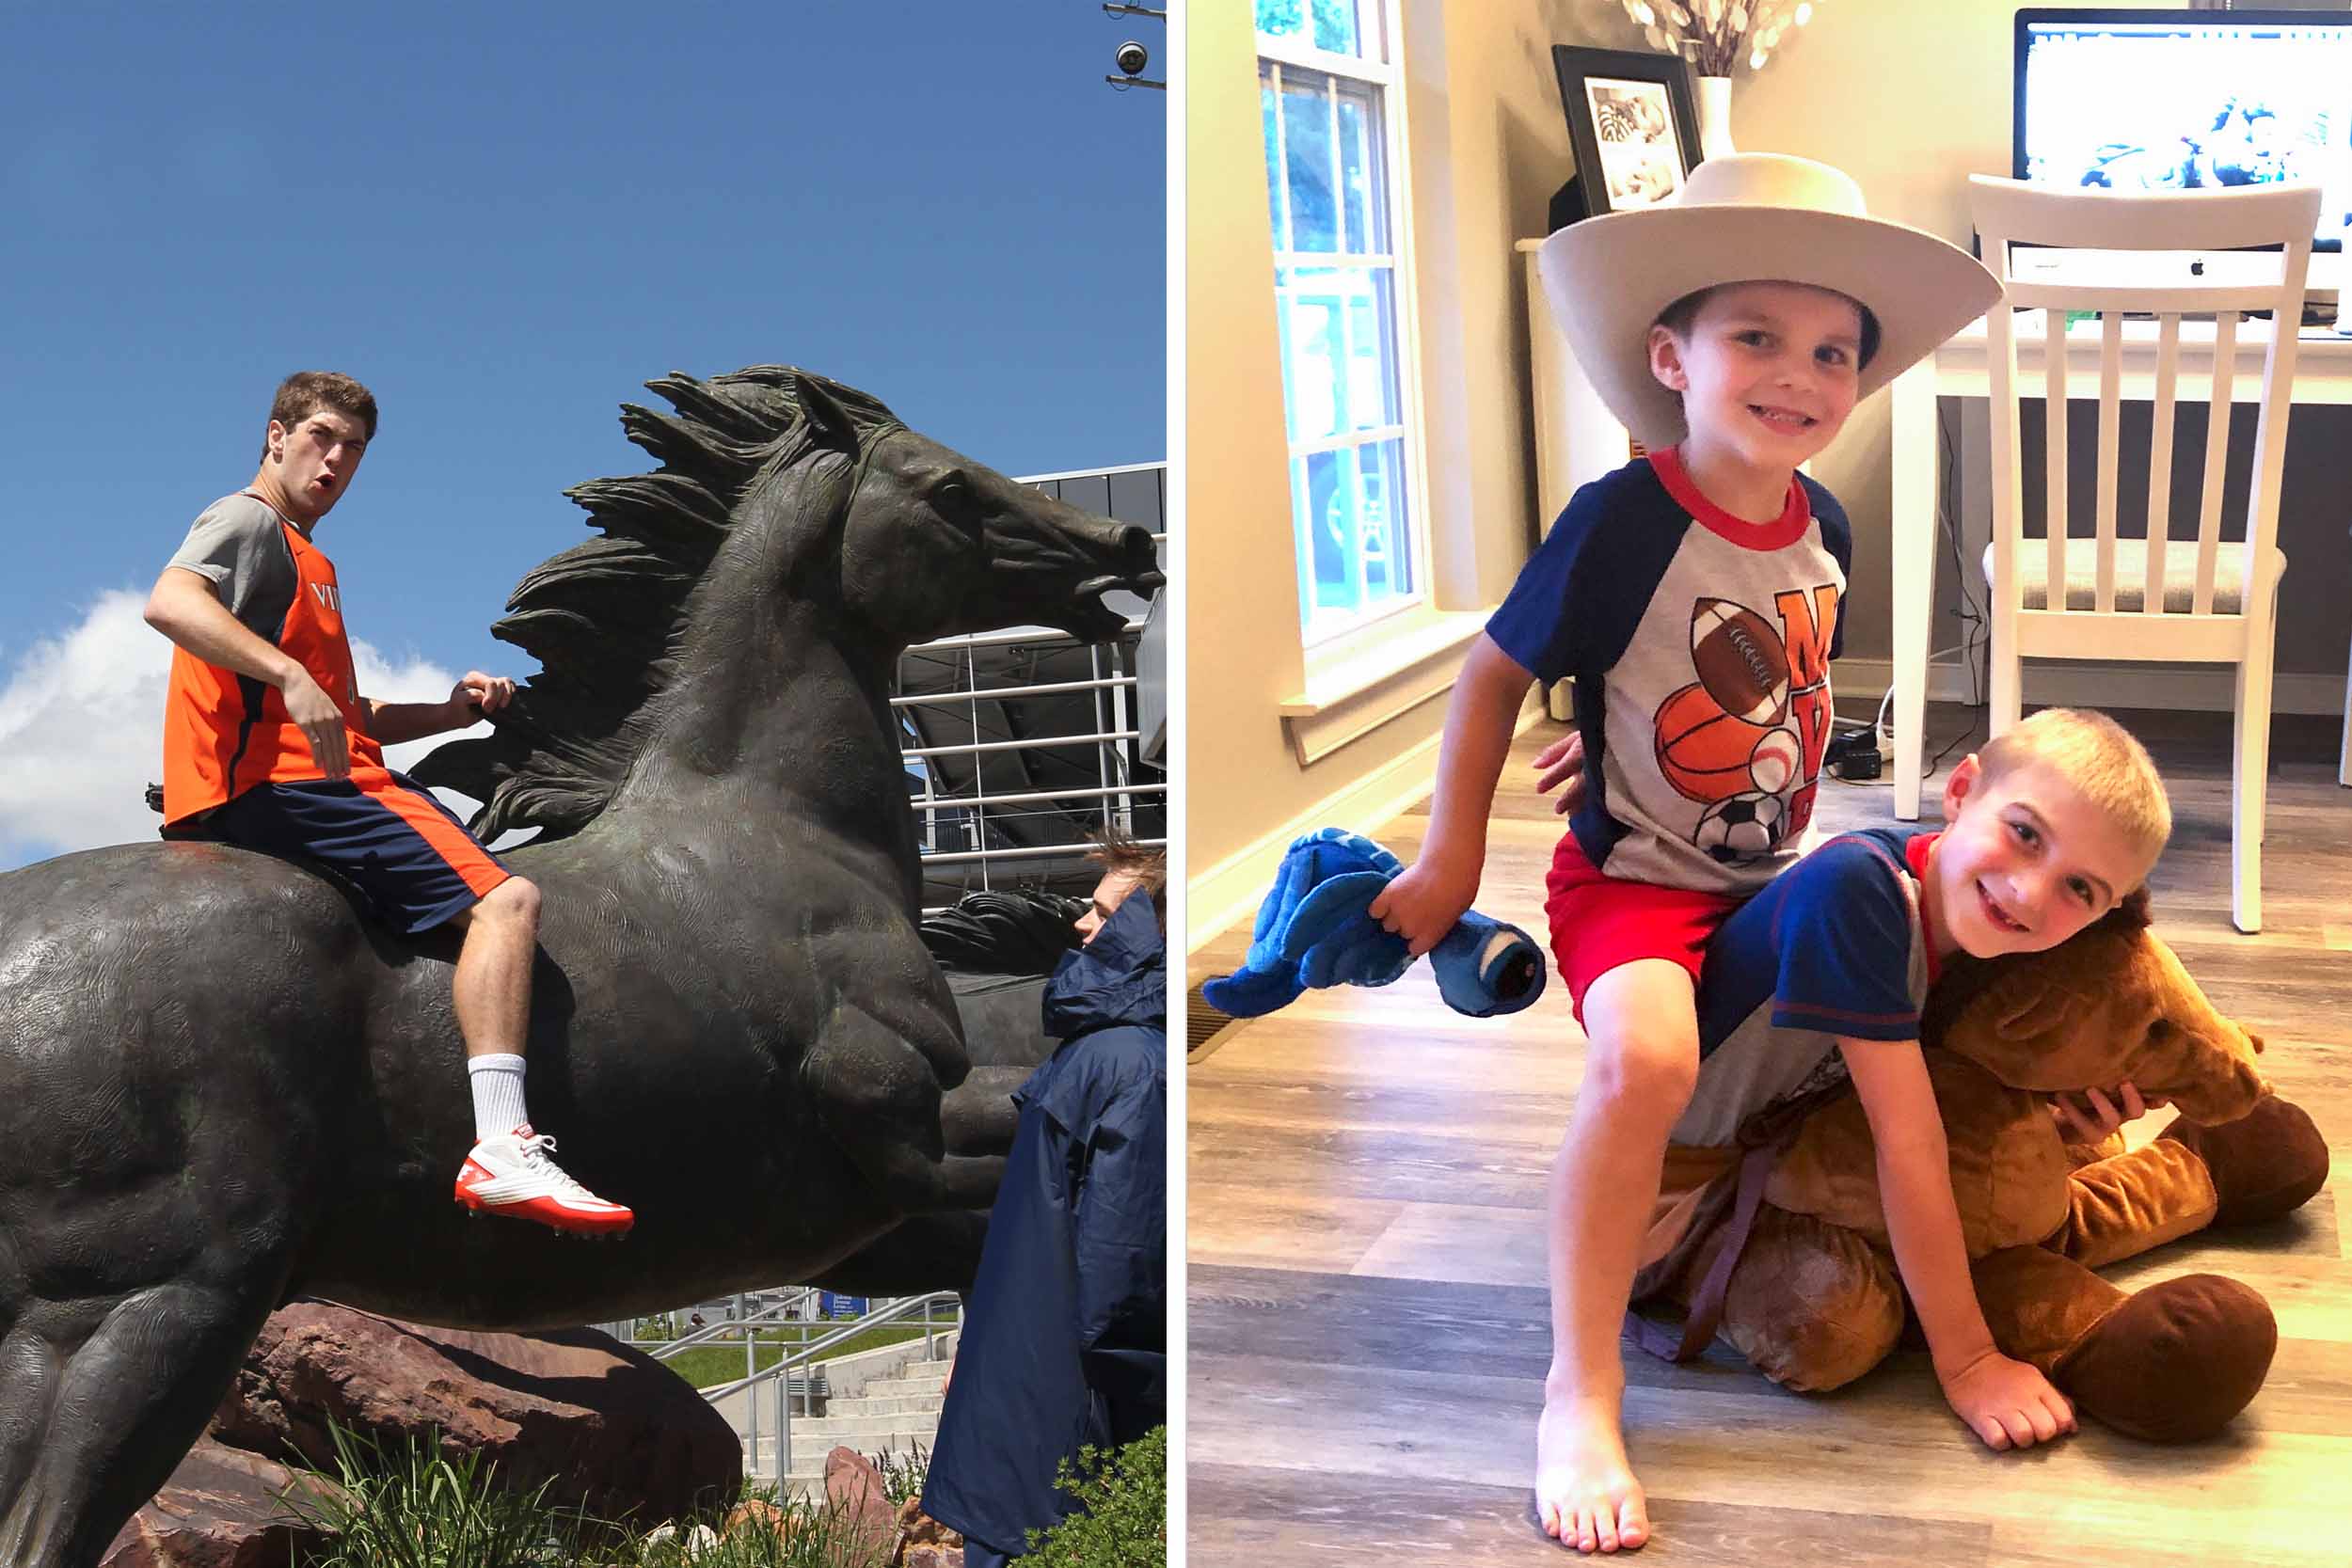 left: UVA student sitting on horse statue.  right: two little boys, playing with a stuffed horse replicating the left photo